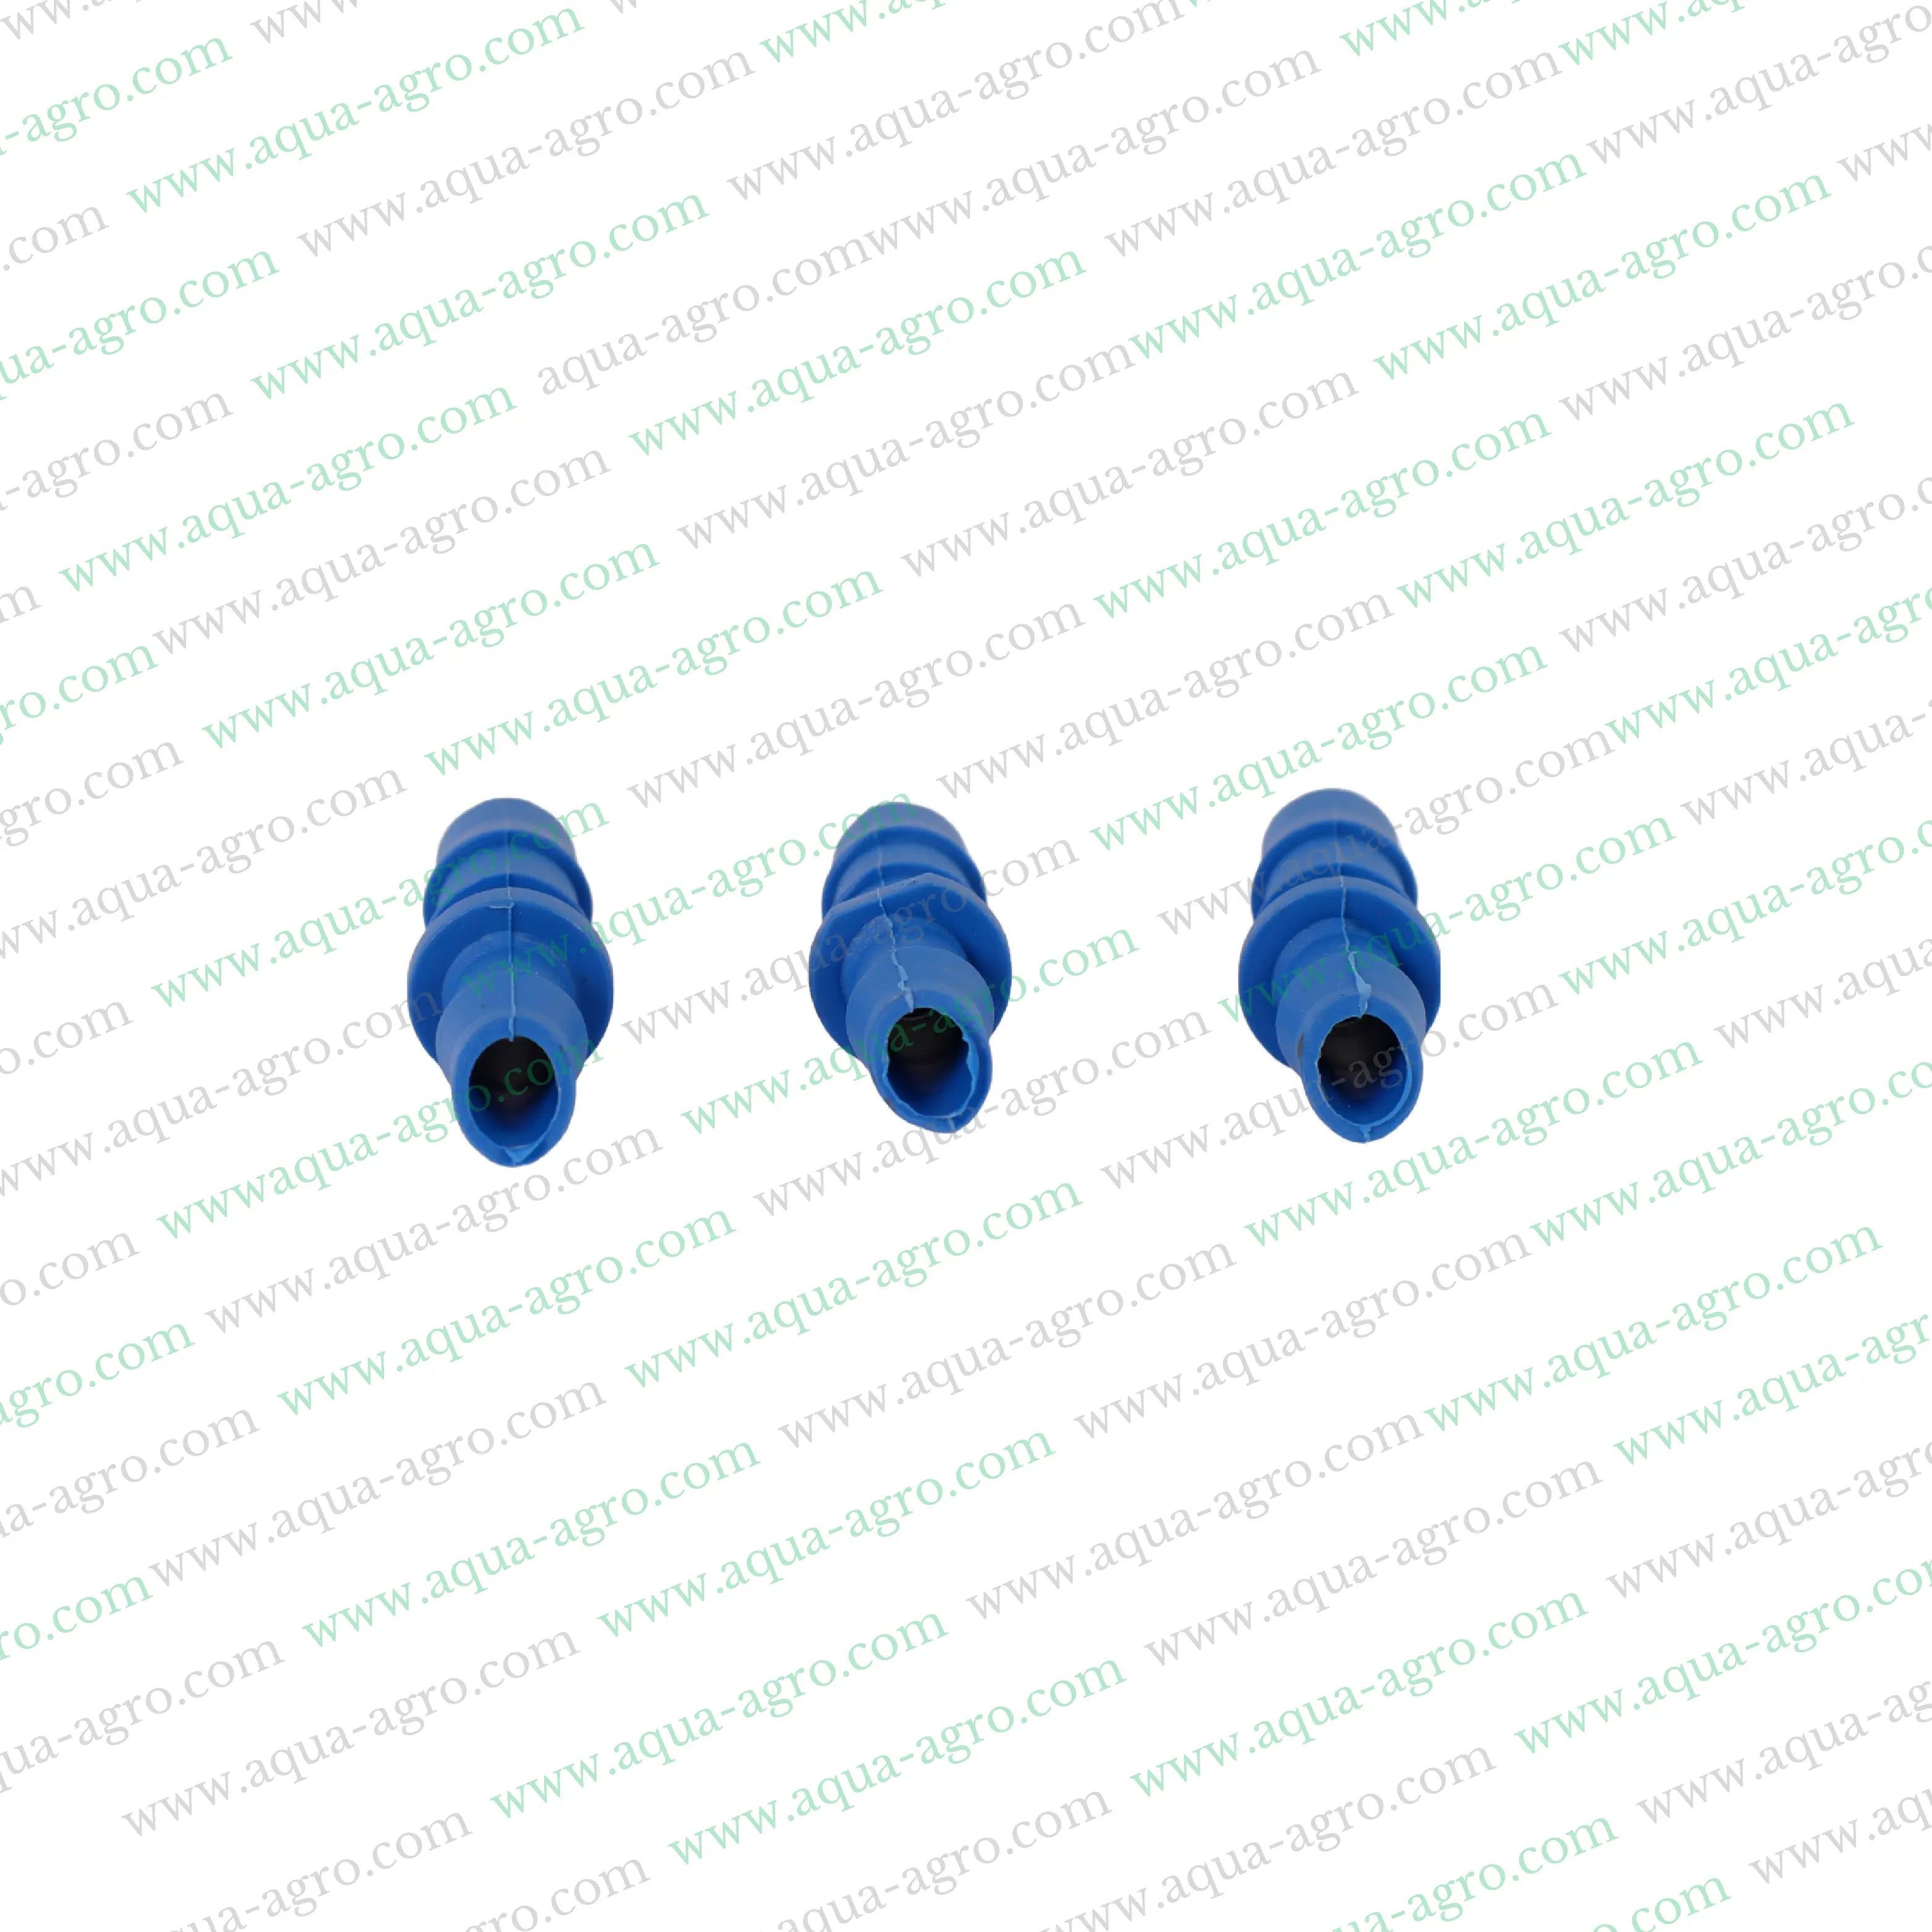 AQUA - AGRO | Drip Fittings And Accessories - Barbed Fittings - Lite - Start Connector - 12mm